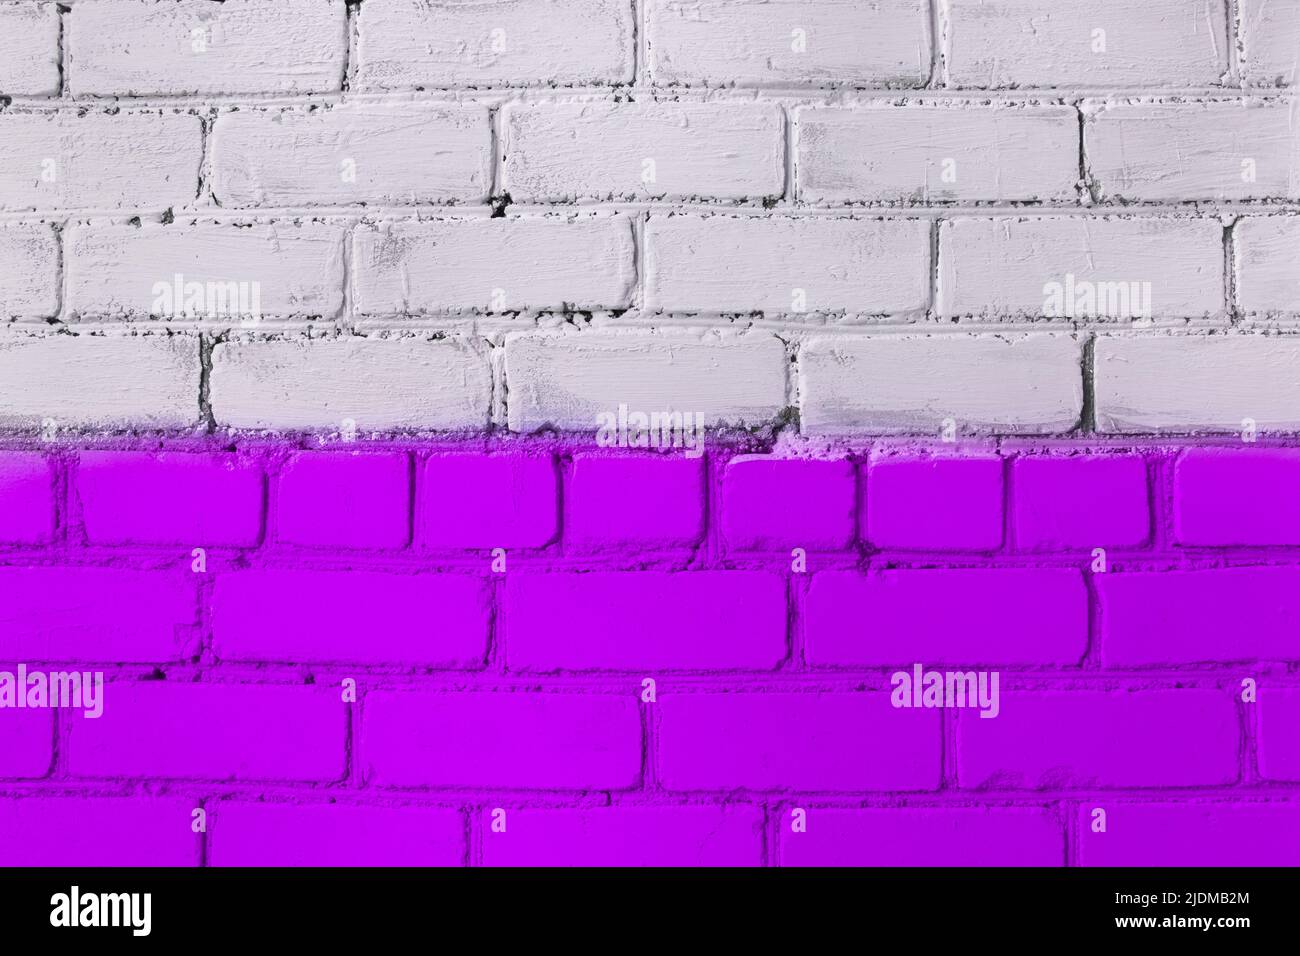 Brick wall paint two colors purple and lilac or violet and white abstract urban background design art texture. Stock Photo